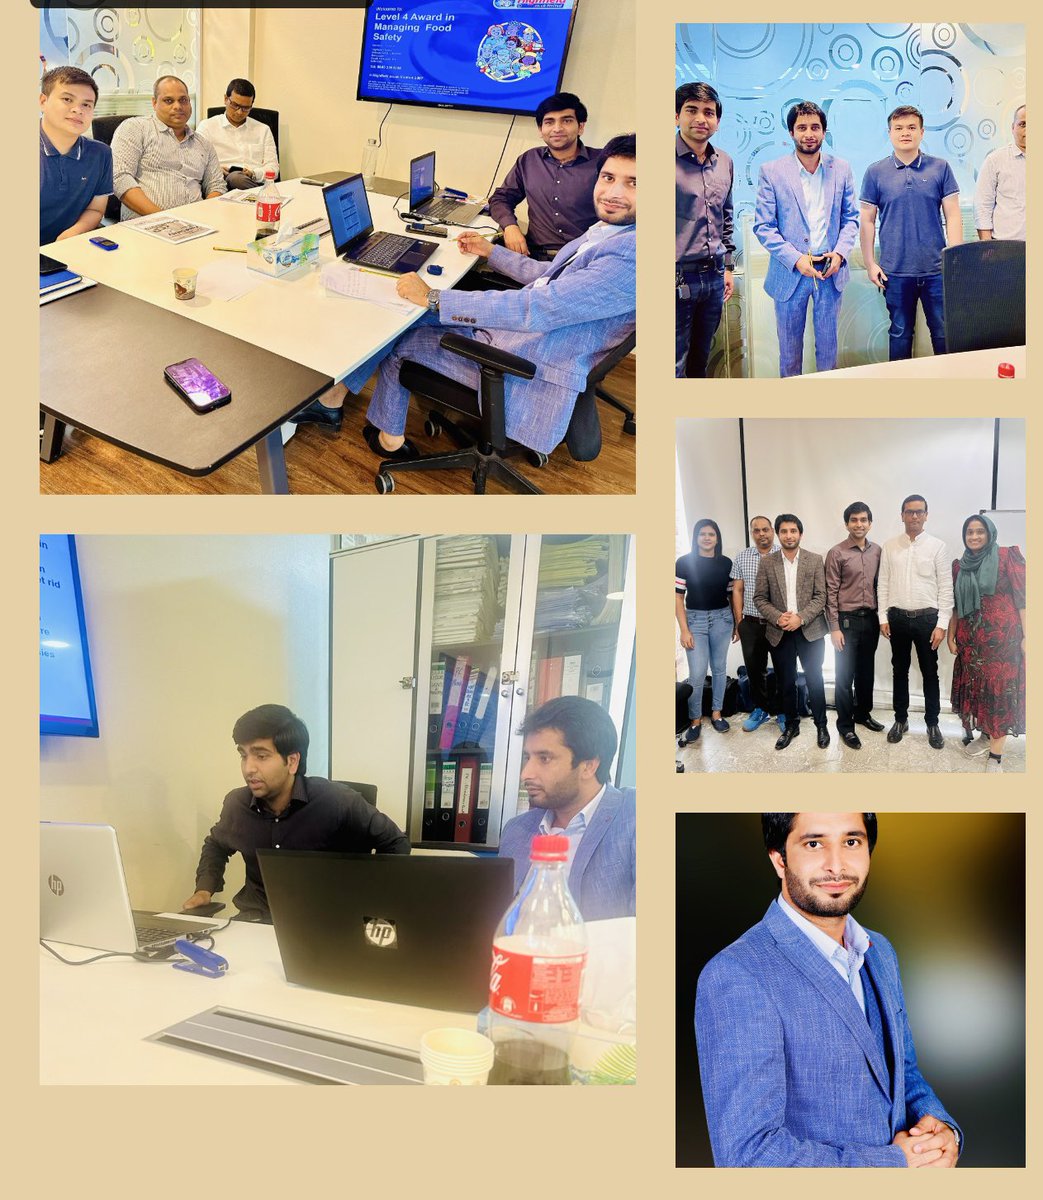 Success is not a result of luck it is the result of hard effort, dedication, and love for what you are doing. my nine-year history from operator to manager of QHSE Alhamdulillah 
 #success #work #love #learning #motivateyourself #hseprofessionals #qhse #educateyourself #Believe